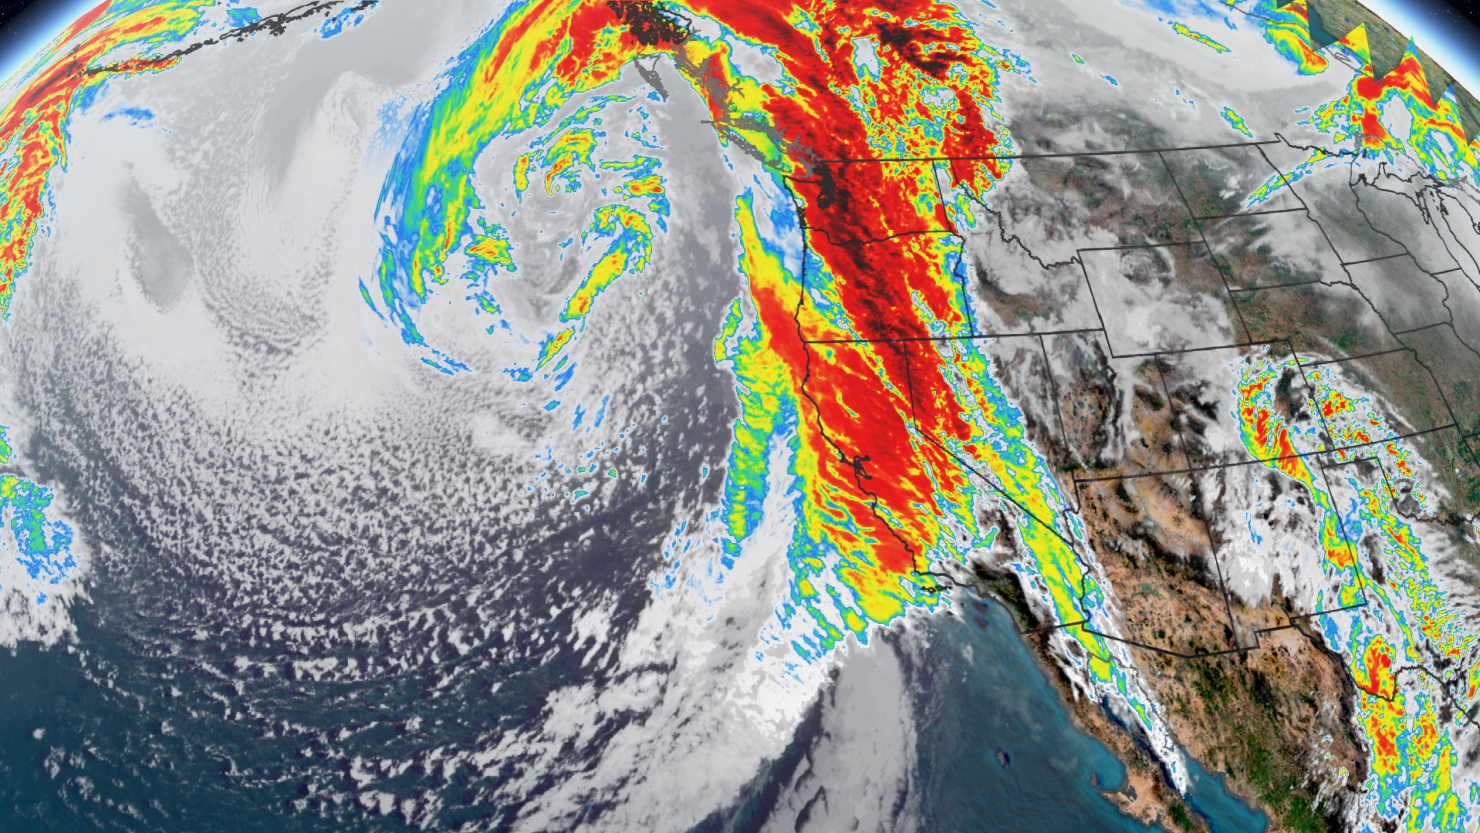 This infrared satellite image shows an atmospheric river slamming into the West Cost on Wednesday, January 31.